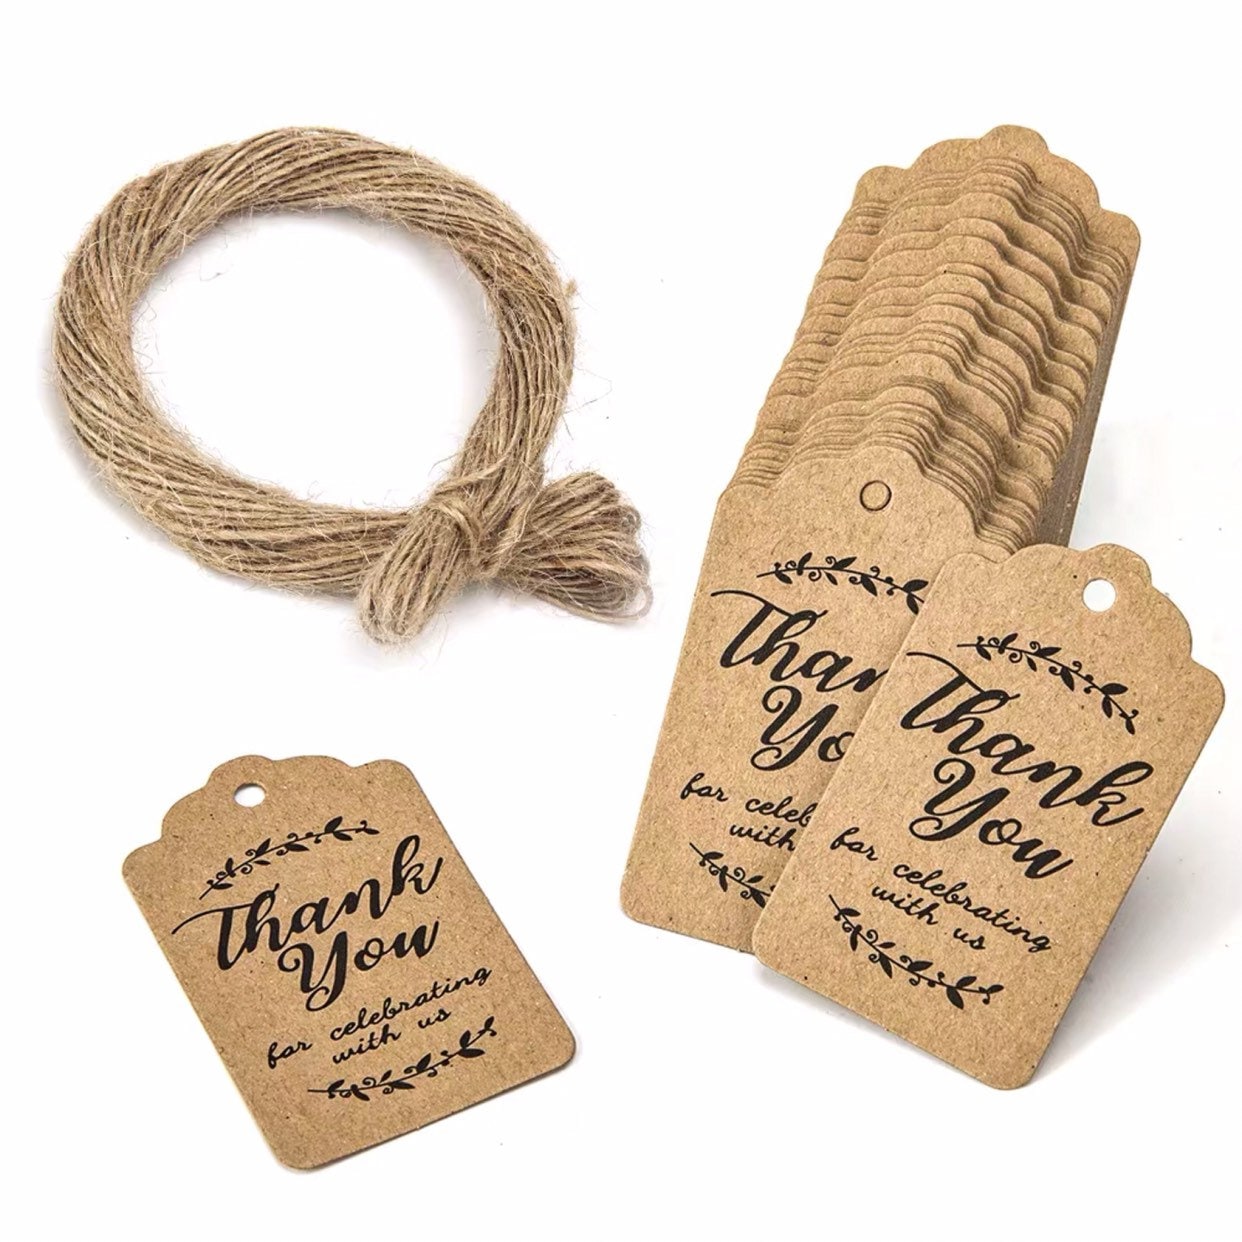 200 Kraft Paper Tags with Jute Twine, 2 Colors Heart Kraft Paper Gift Tags  for Gifts Arts and Crafts, Wedding Thanksgiving Christmas ect